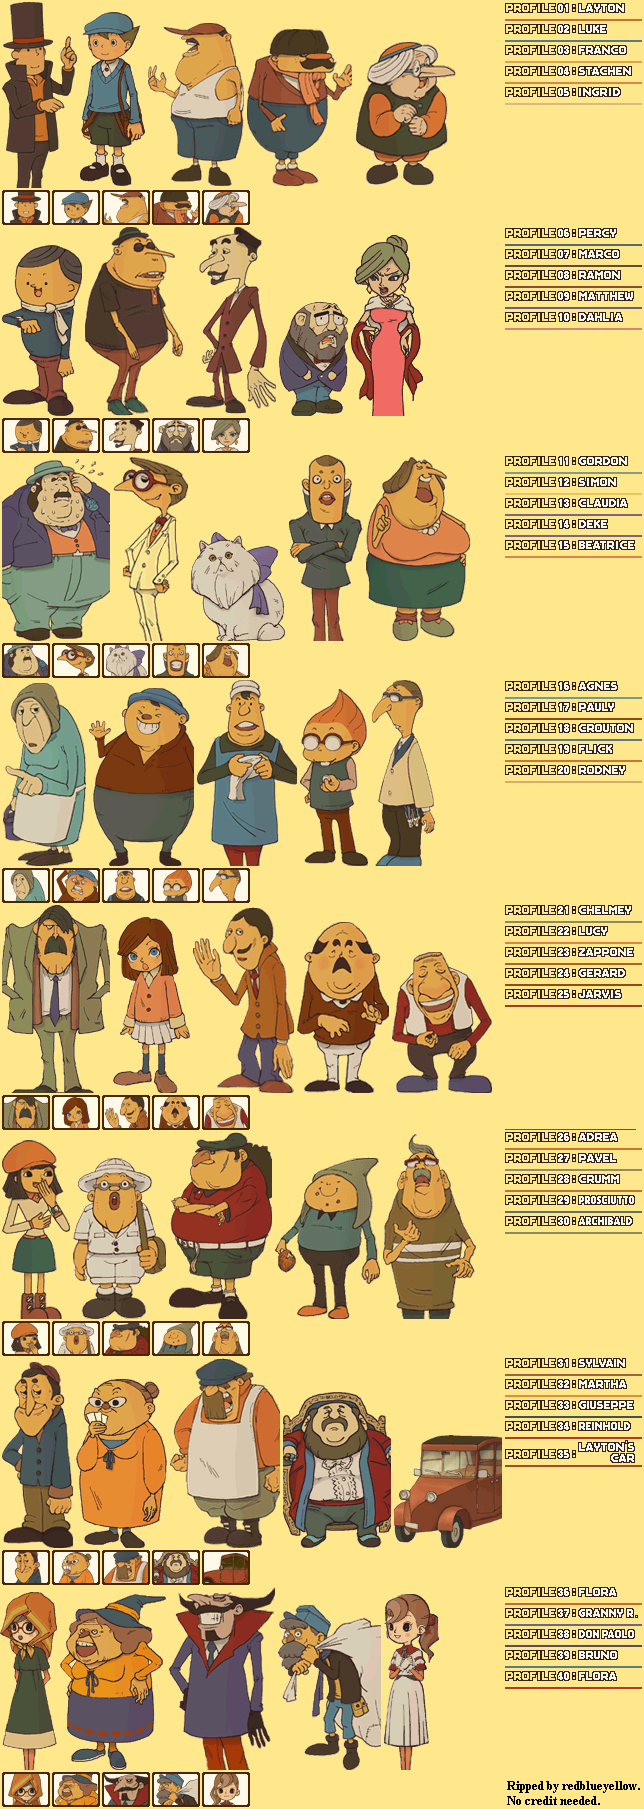 Professor Layton and the Curious Village - Character Profiles